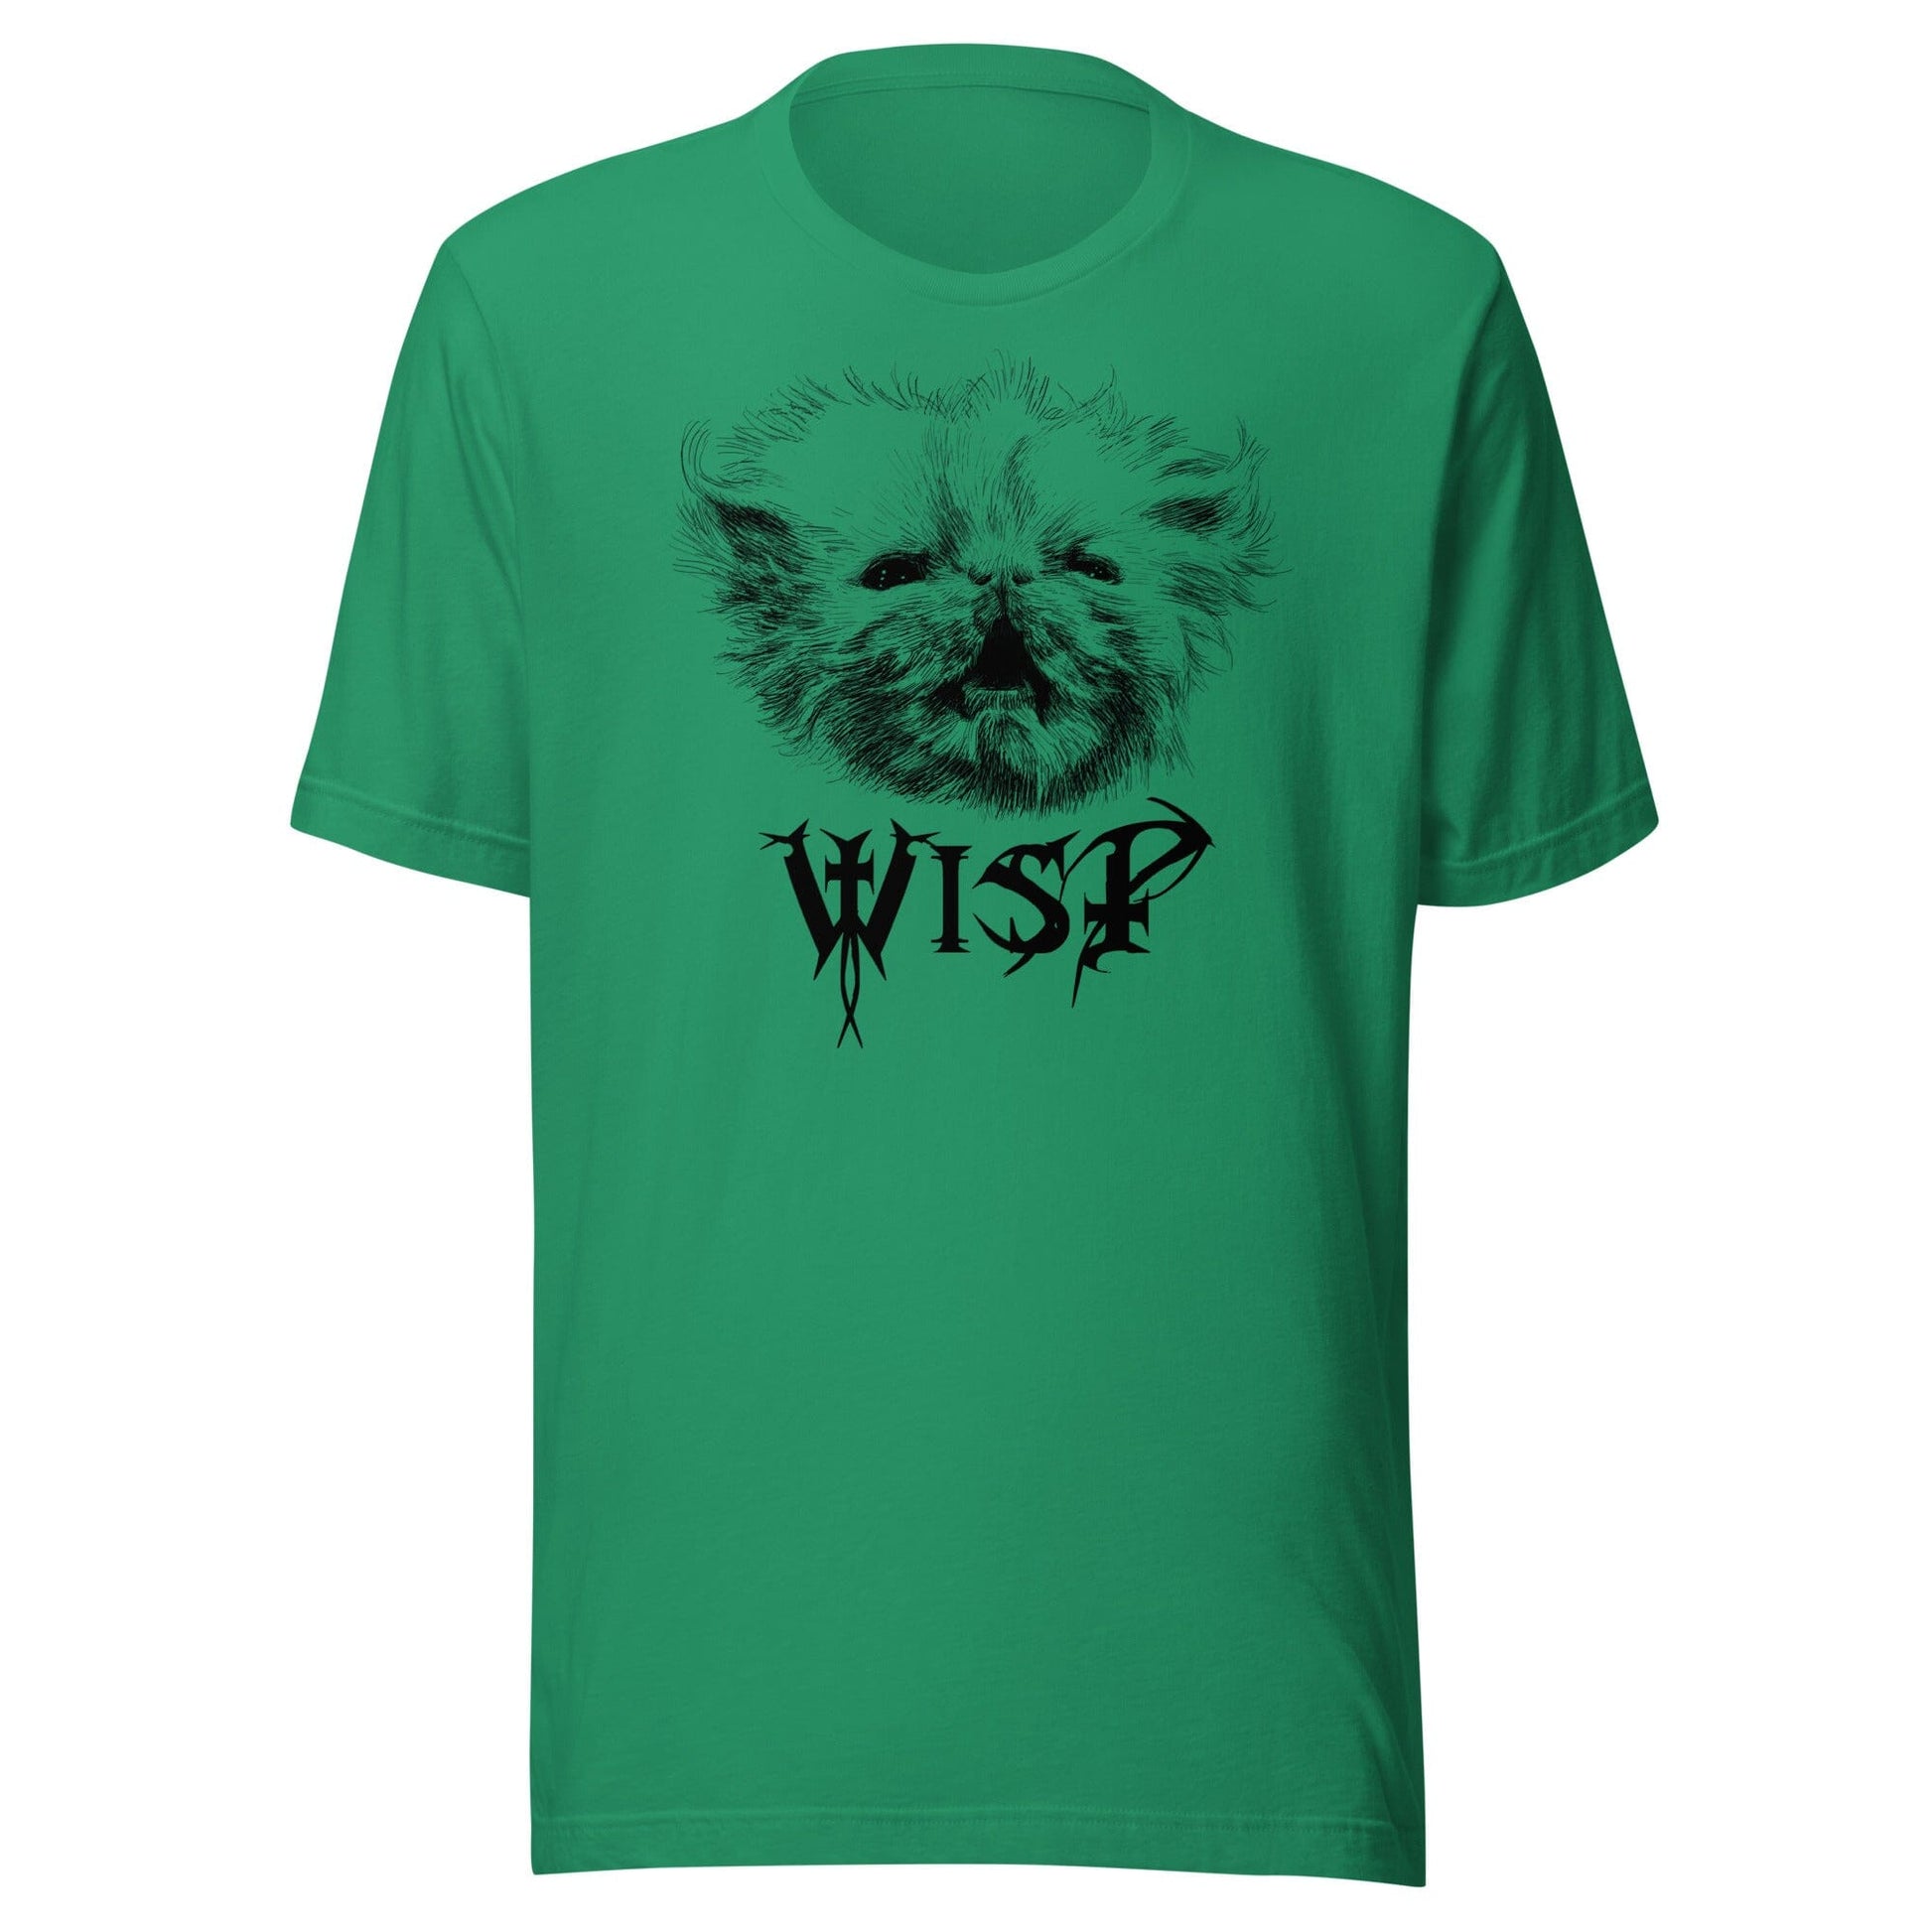 Metal Wisp T-Shirt [Unfoiled] (All net proceeds go to Rags to Riches Animal Rescue) JoyousJoyfulJoyness Kelly XS 